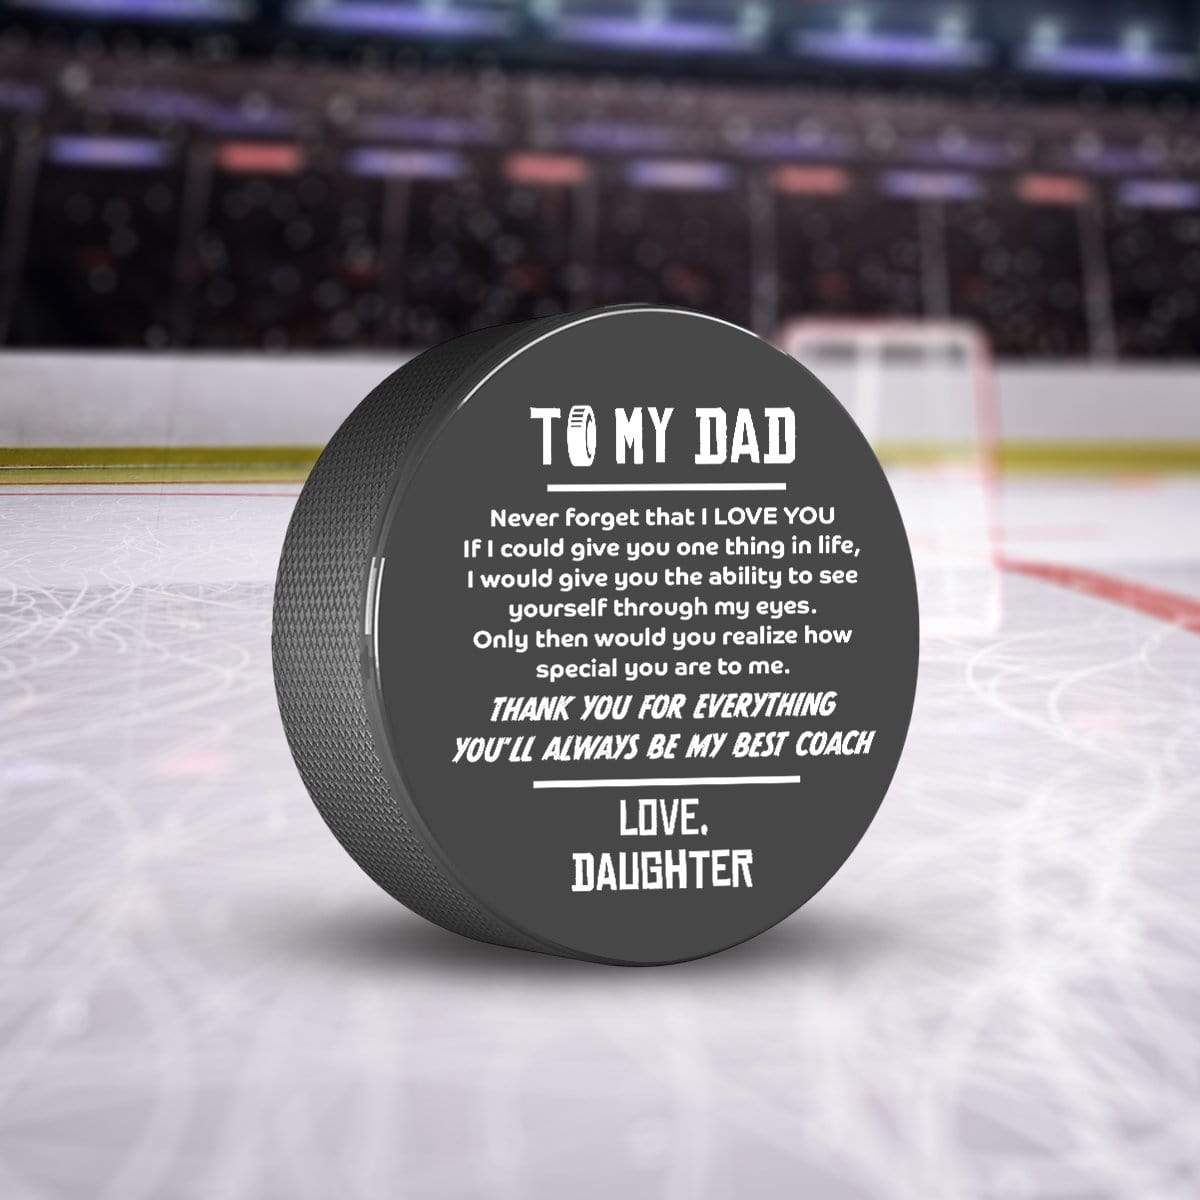 Hockey Puck - Hockey - To My Dad - From Daughter - Never Forget That I Love You - Gai18009